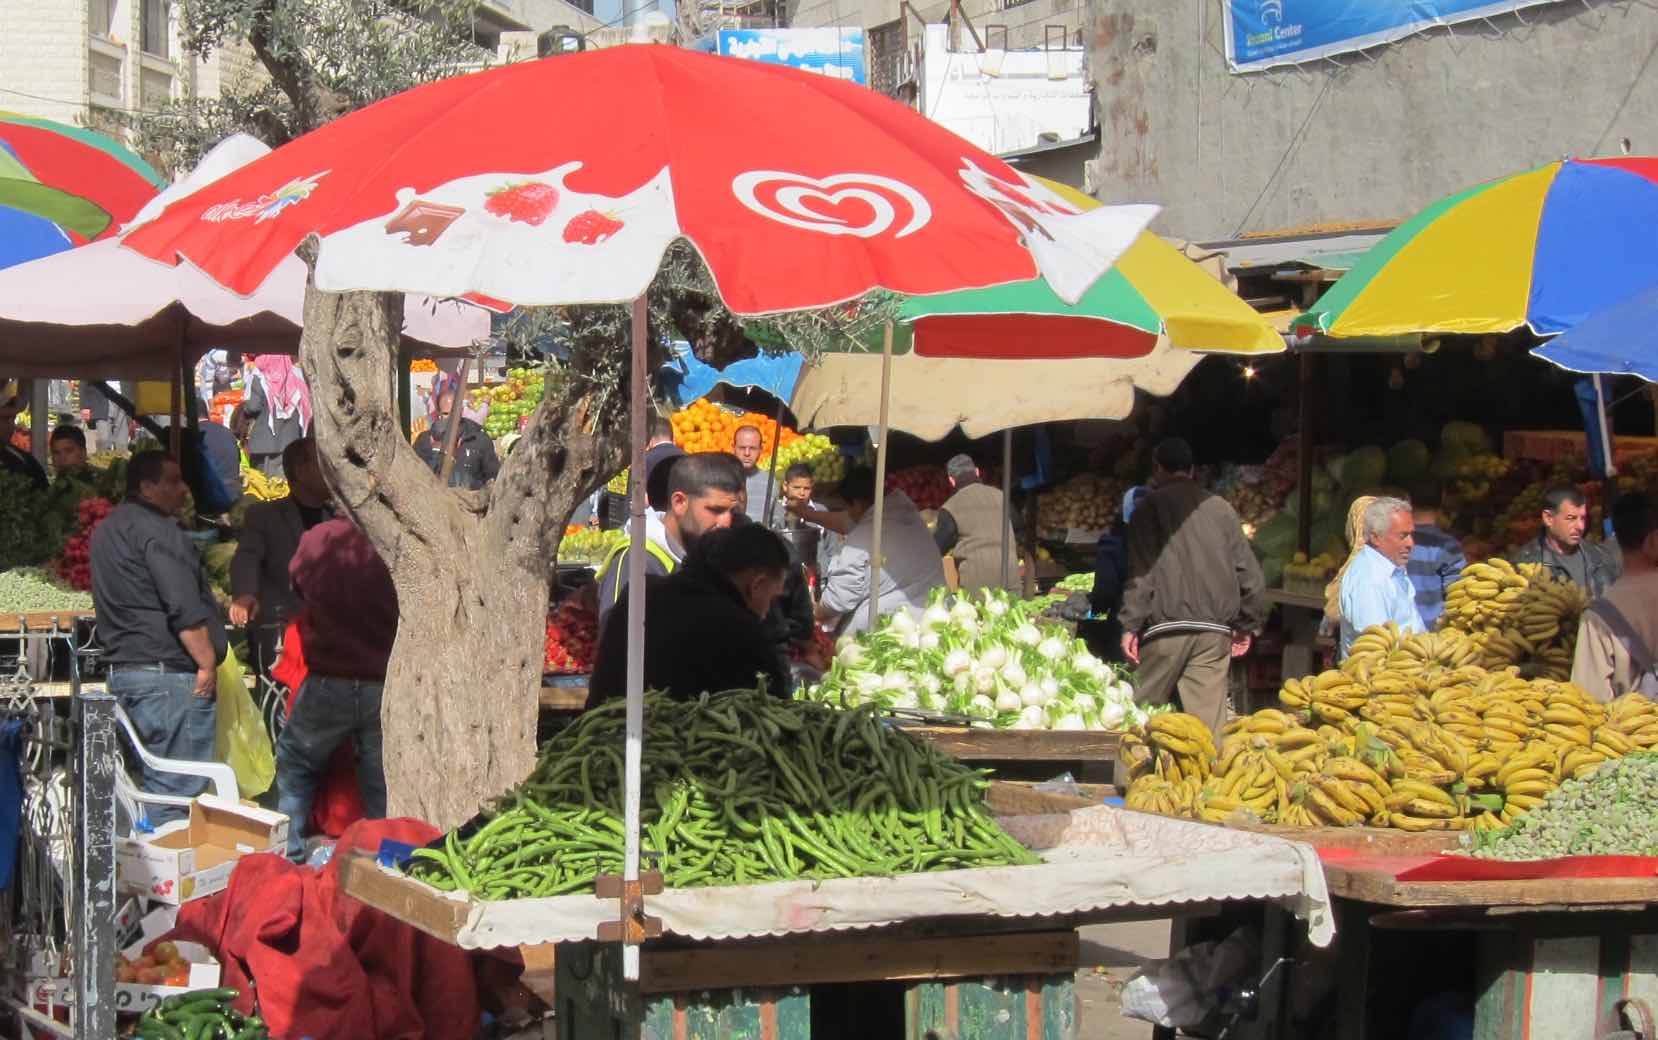 Fruits and vegetables on carts, one with a red umbrella, with people